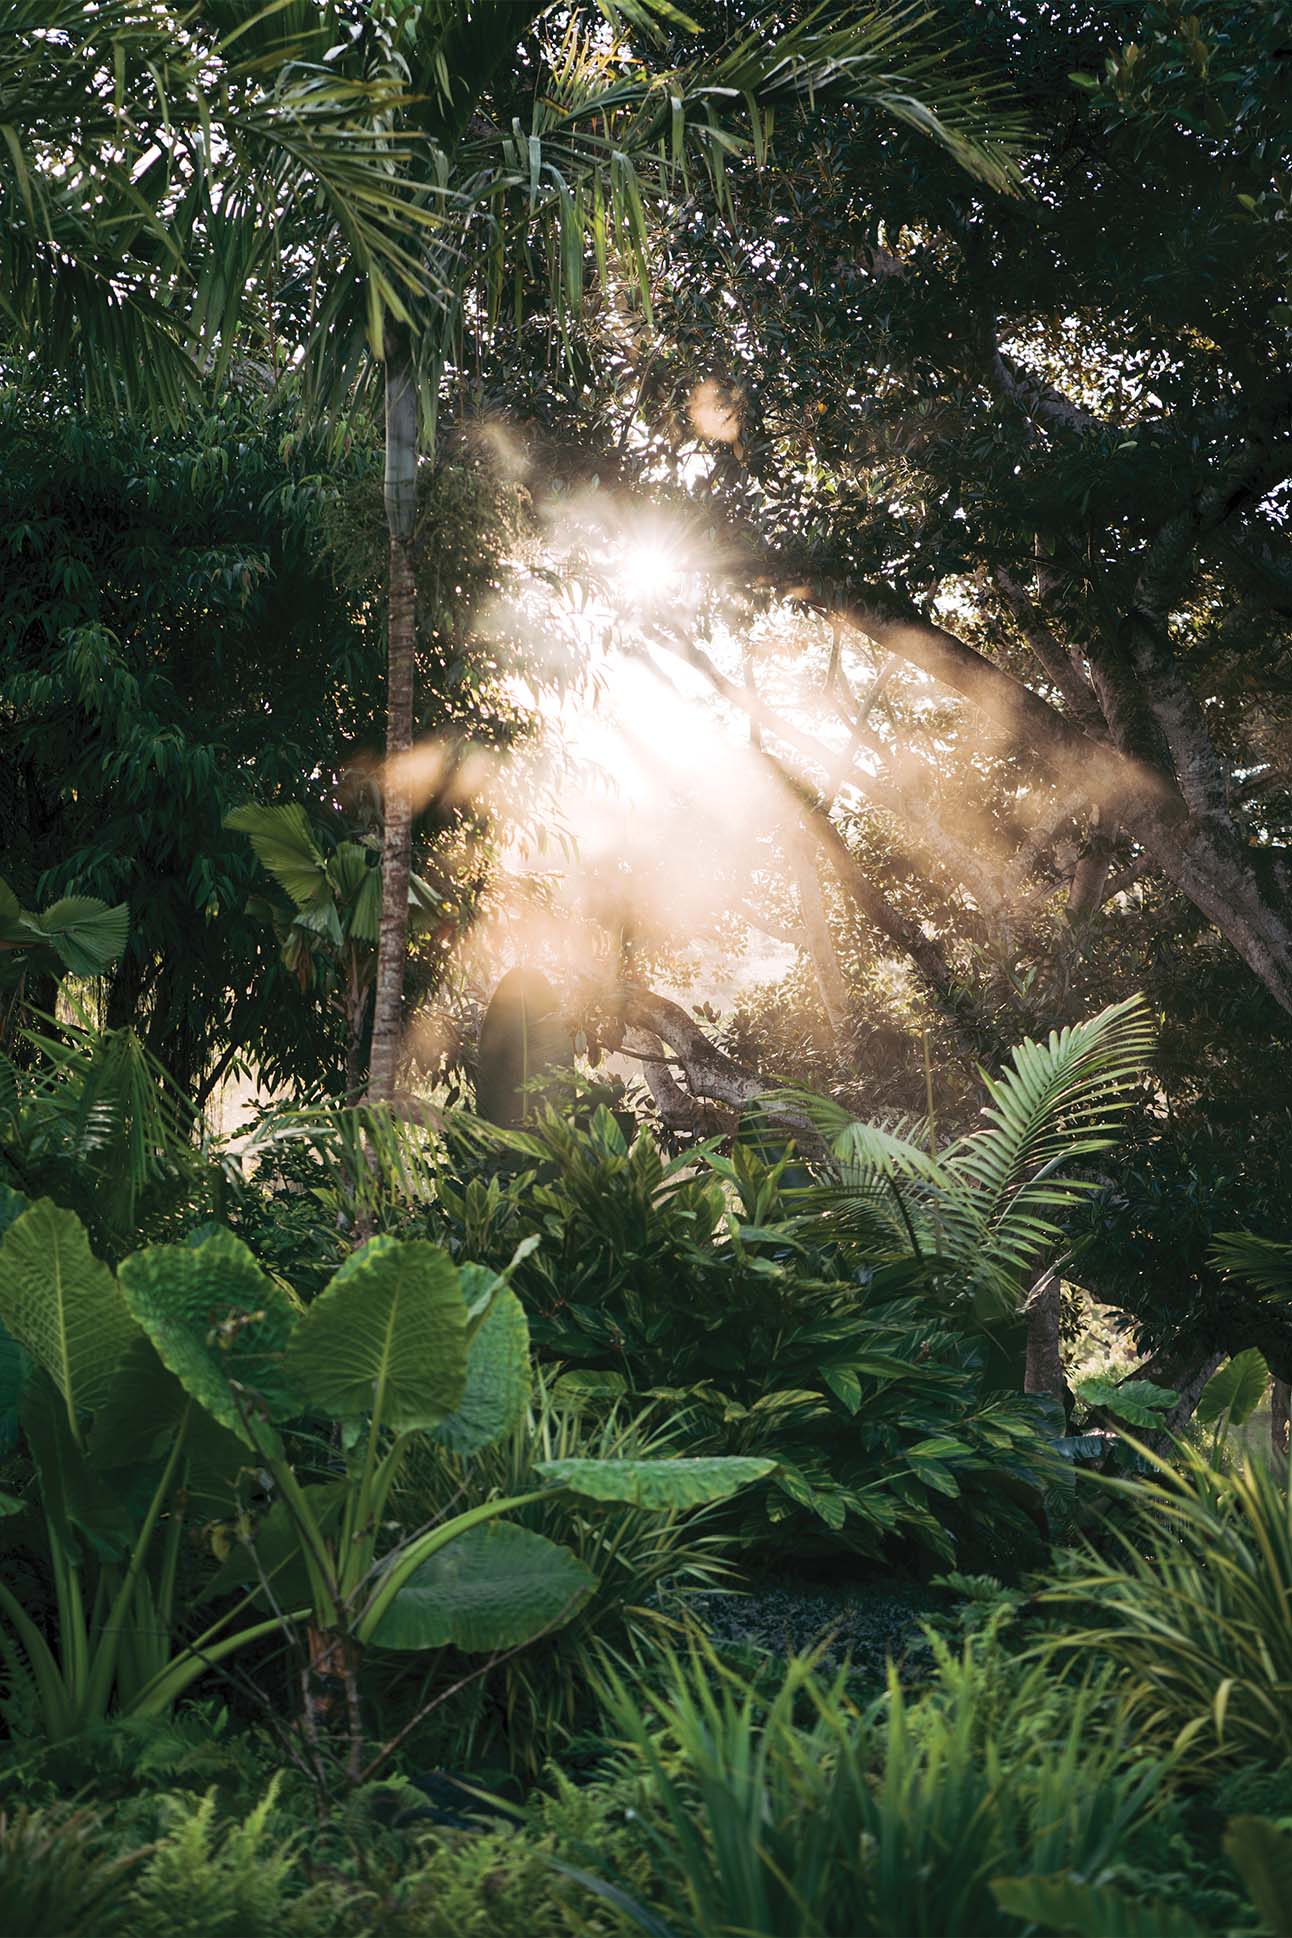 Sunlight filtering through dense tropical foliage with rays of light creating a mystical atmosphere.